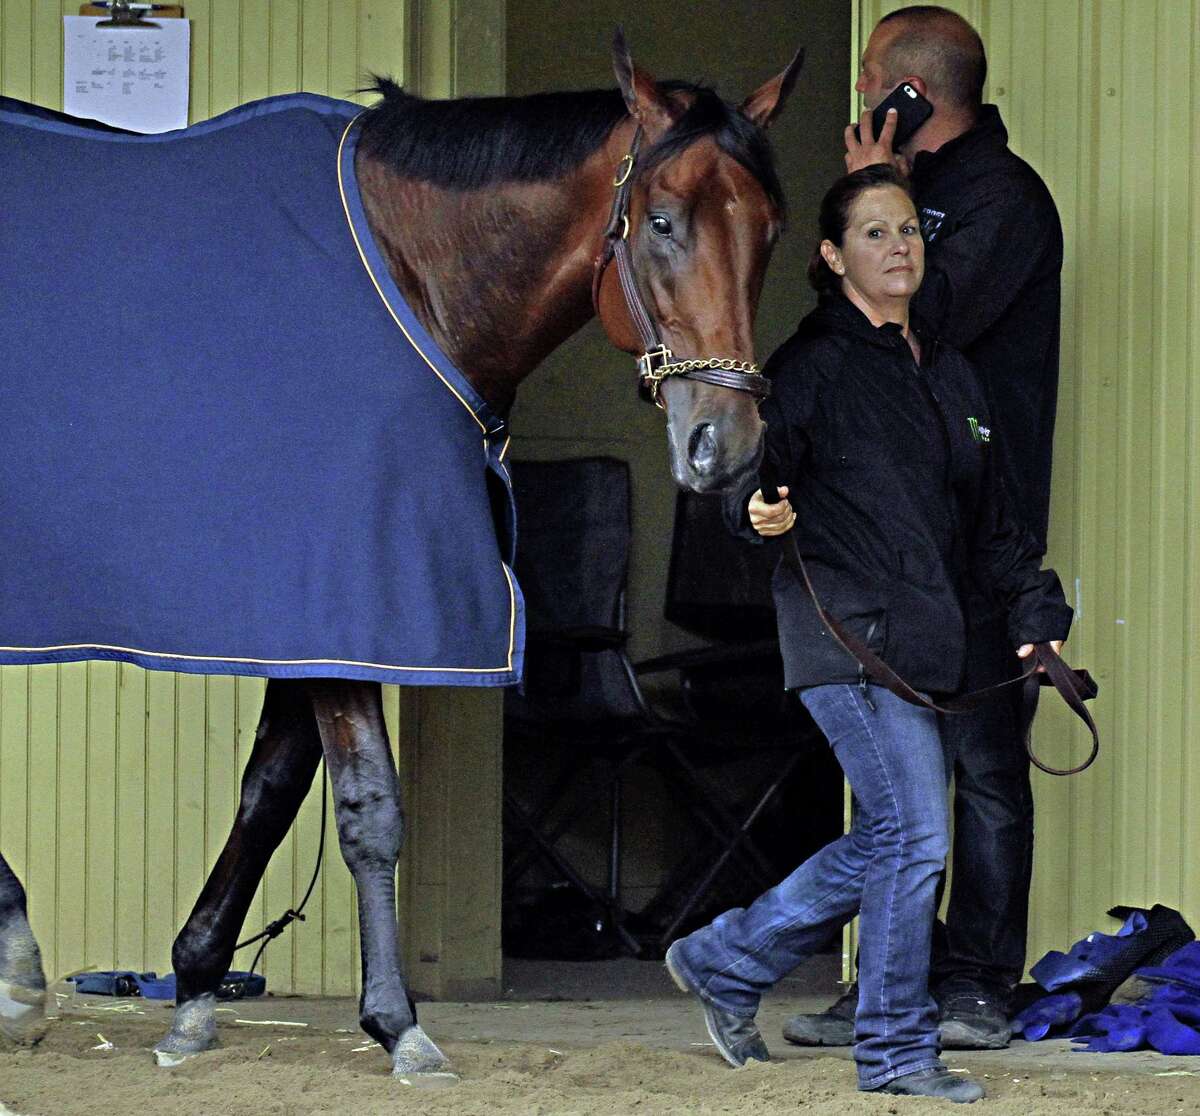 Exercise rider Dana Barnes walks American Pharoah in the barn after a morning gallop Friday at Belmont Park in Elmont, N.Y.